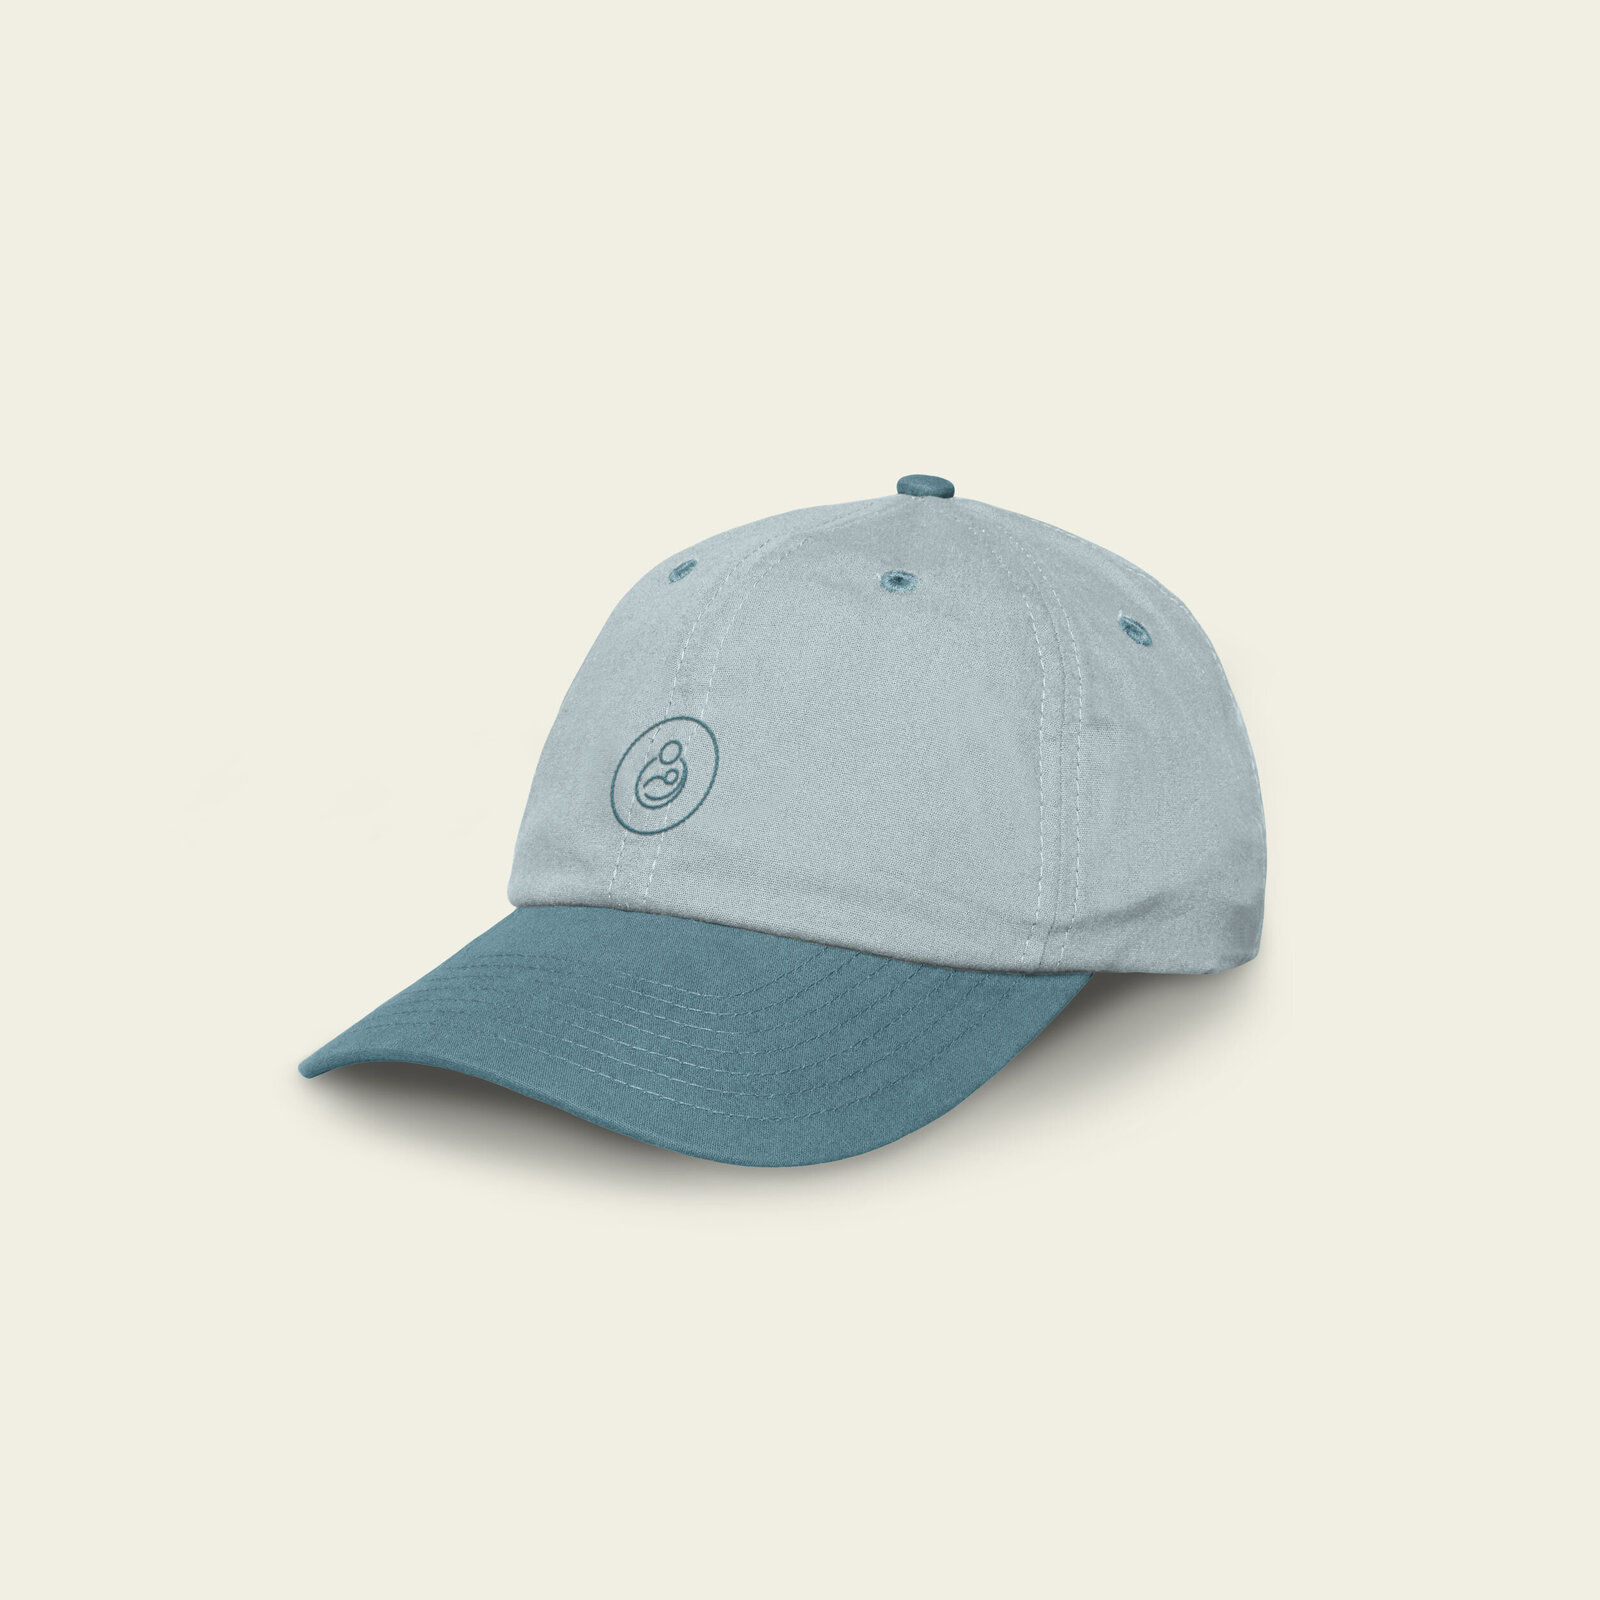 Steady Parents logo mark embroidered on hat mockup